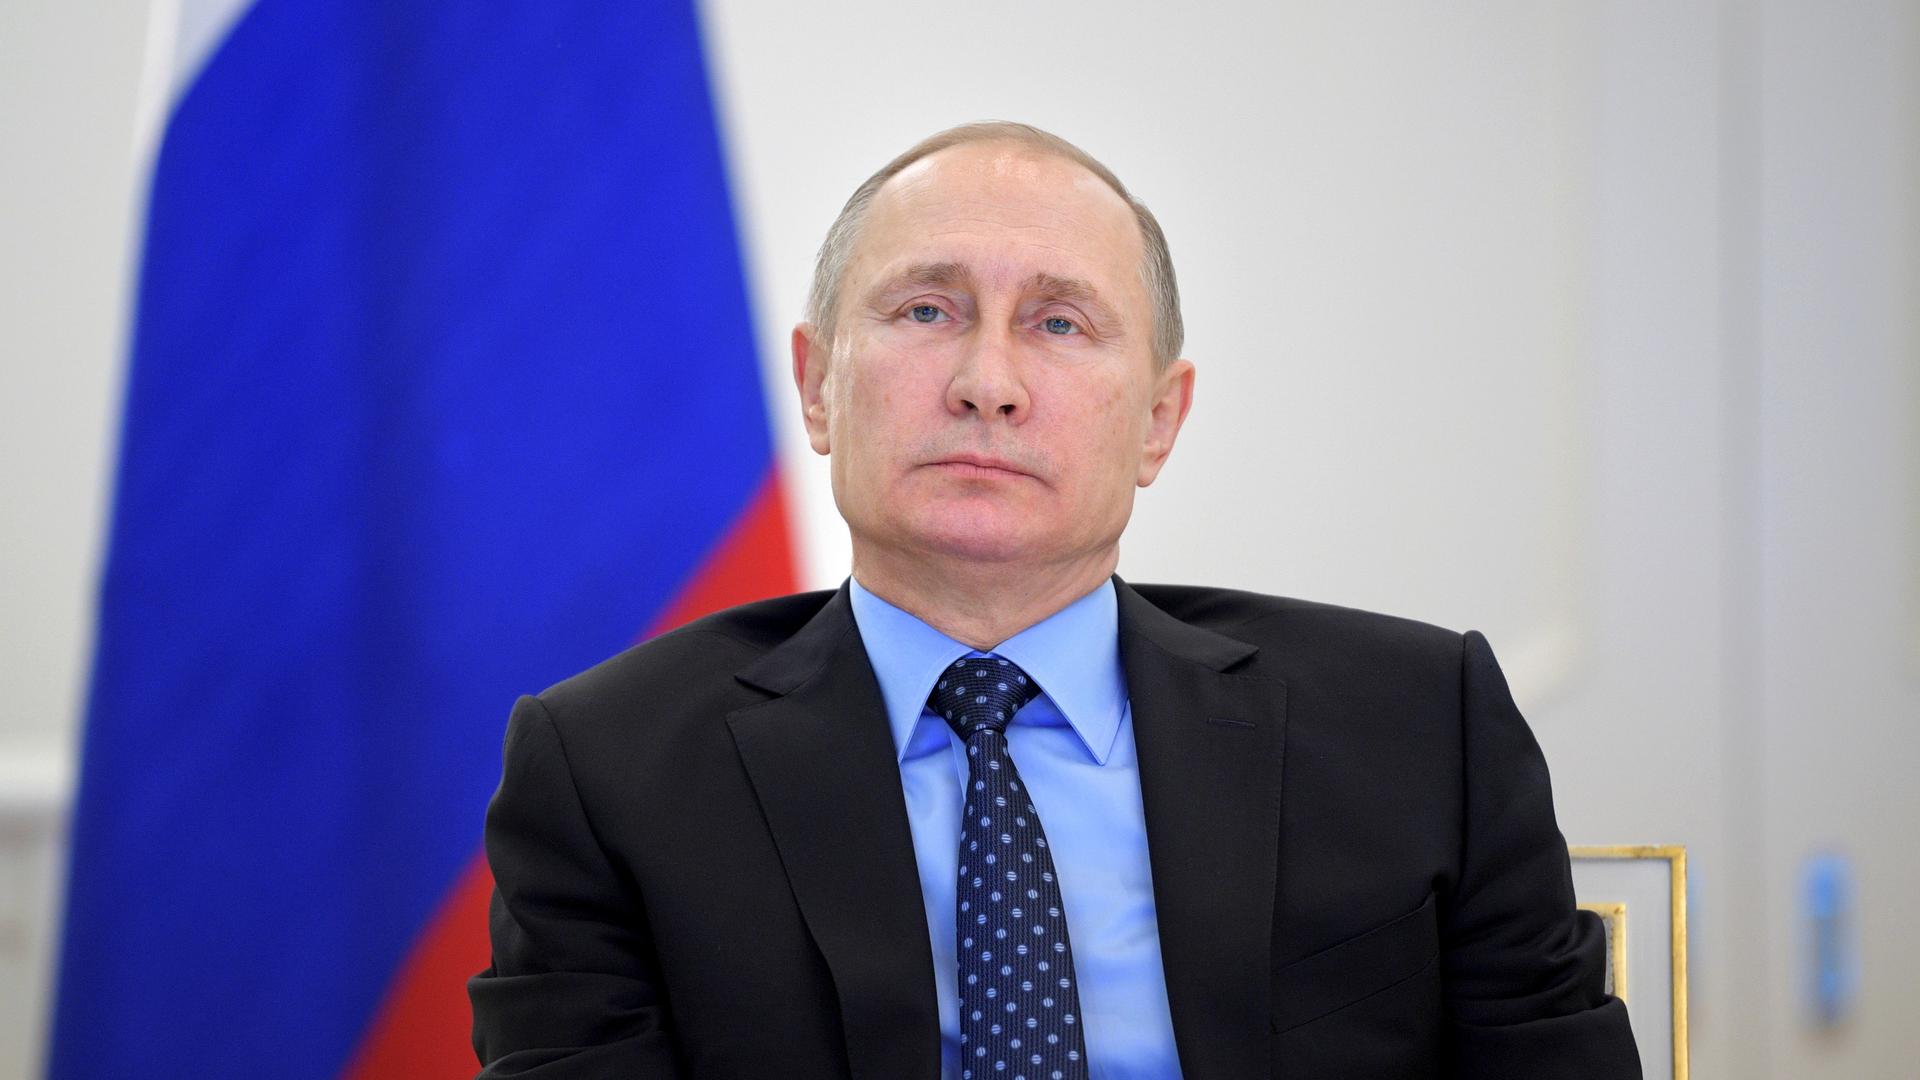 Russian President Vladimir Putin, seen here at a public event on Tuesday, is not reacting to new US sanctions